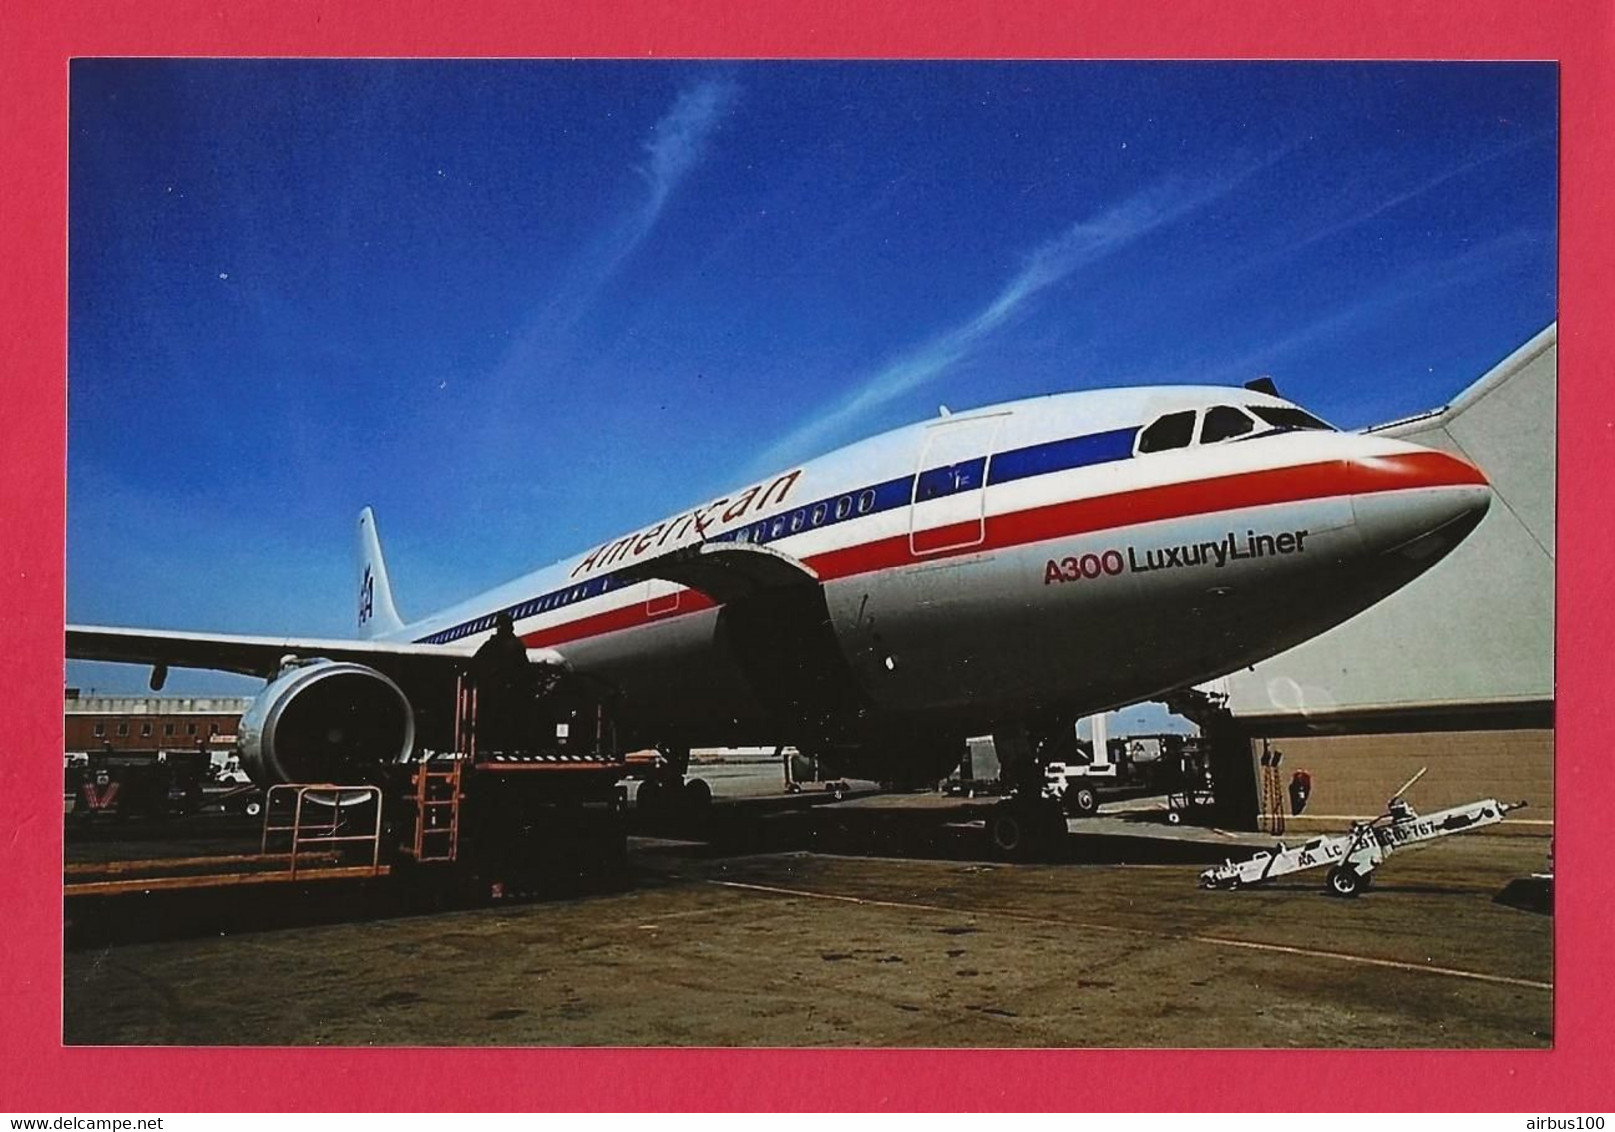 BELLE PHOTO REPRODUCTION AVION PLANE FLUGZEUG - AIRBUS A 300 LUXURY LINER AMERICAN - Aviazione